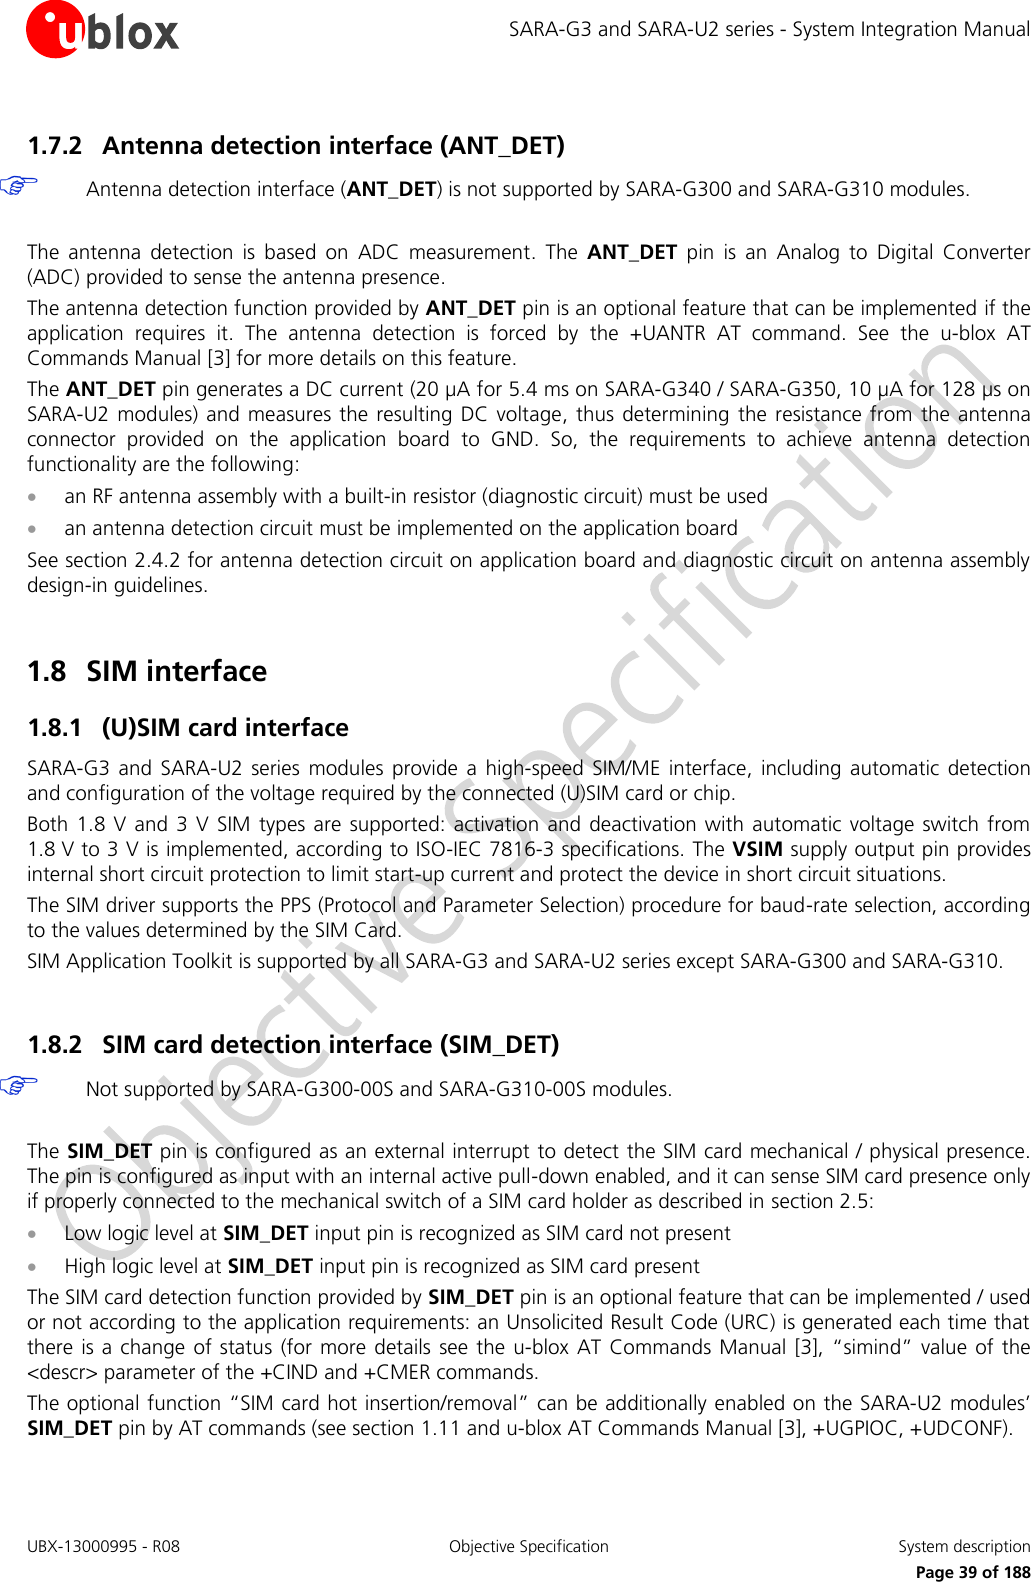 SARA-G3 and SARA-U2 series - System Integration Manual UBX-13000995 - R08  Objective Specification  System description     Page 39 of 188 1.7.2 Antenna detection interface (ANT_DET)  Antenna detection interface (ANT_DET) is not supported by SARA-G300 and SARA-G310 modules.  The  antenna  detection  is  based  on  ADC  measurement.  The  ANT_DET  pin  is  an  Analog  to  Digital  Converter (ADC) provided to sense the antenna presence. The antenna detection function provided by ANT_DET pin is an optional feature that can be implemented if the application  requires  it.  The  antenna  detection  is  forced  by  the  +UANTR  AT  command.  See  the  u-blox  AT Commands Manual [3] for more details on this feature. The ANT_DET pin generates a DC current (20 µA for 5.4 ms on SARA-G340 / SARA-G350, 10 µA for 128 µs on SARA-U2  modules) and  measures  the resulting DC  voltage, thus determining the  resistance  from  the antenna connector  provided  on  the  application  board  to  GND.  So,  the  requirements  to  achieve  antenna  detection functionality are the following:  an RF antenna assembly with a built-in resistor (diagnostic circuit) must be used  an antenna detection circuit must be implemented on the application board See section 2.4.2 for antenna detection circuit on application board and diagnostic circuit on antenna assembly design-in guidelines.  1.8 SIM interface 1.8.1 (U)SIM card interface SARA-G3  and  SARA-U2  series  modules  provide  a  high-speed  SIM/ME  interface,  including  automatic  detection and configuration of the voltage required by the connected (U)SIM card or chip. Both 1.8  V and  3 V  SIM  types  are  supported: activation and deactivation with  automatic  voltage  switch from 1.8 V to 3 V is implemented, according to ISO-IEC 7816-3 specifications. The VSIM supply output pin provides internal short circuit protection to limit start-up current and protect the device in short circuit situations. The SIM driver supports the PPS (Protocol and Parameter Selection) procedure for baud-rate selection, according to the values determined by the SIM Card. SIM Application Toolkit is supported by all SARA-G3 and SARA-U2 series except SARA-G300 and SARA-G310.  1.8.2 SIM card detection interface (SIM_DET)  Not supported by SARA-G300-00S and SARA-G310-00S modules.  The SIM_DET pin is configured as an external interrupt to detect the SIM card mechanical / physical presence. The pin is configured as input with an internal active pull-down enabled, and it can sense SIM card presence only if properly connected to the mechanical switch of a SIM card holder as described in section 2.5:  Low logic level at SIM_DET input pin is recognized as SIM card not present  High logic level at SIM_DET input pin is recognized as SIM card present The SIM card detection function provided by SIM_DET pin is an optional feature that can be implemented / used or not according to the application requirements: an Unsolicited Result Code (URC) is generated each time that there is a change  of status  (for more  details  see the  u-blox AT  Commands  Manual [3], “simind” value  of the &lt;descr&gt; parameter of the +CIND and +CMER commands. The optional function “SIM card hot insertion/removal” can be additionally enabled on the SARA-U2 modules’ SIM_DET pin by AT commands (see section 1.11 and u-blox AT Commands Manual [3], +UGPIOC, +UDCONF).  